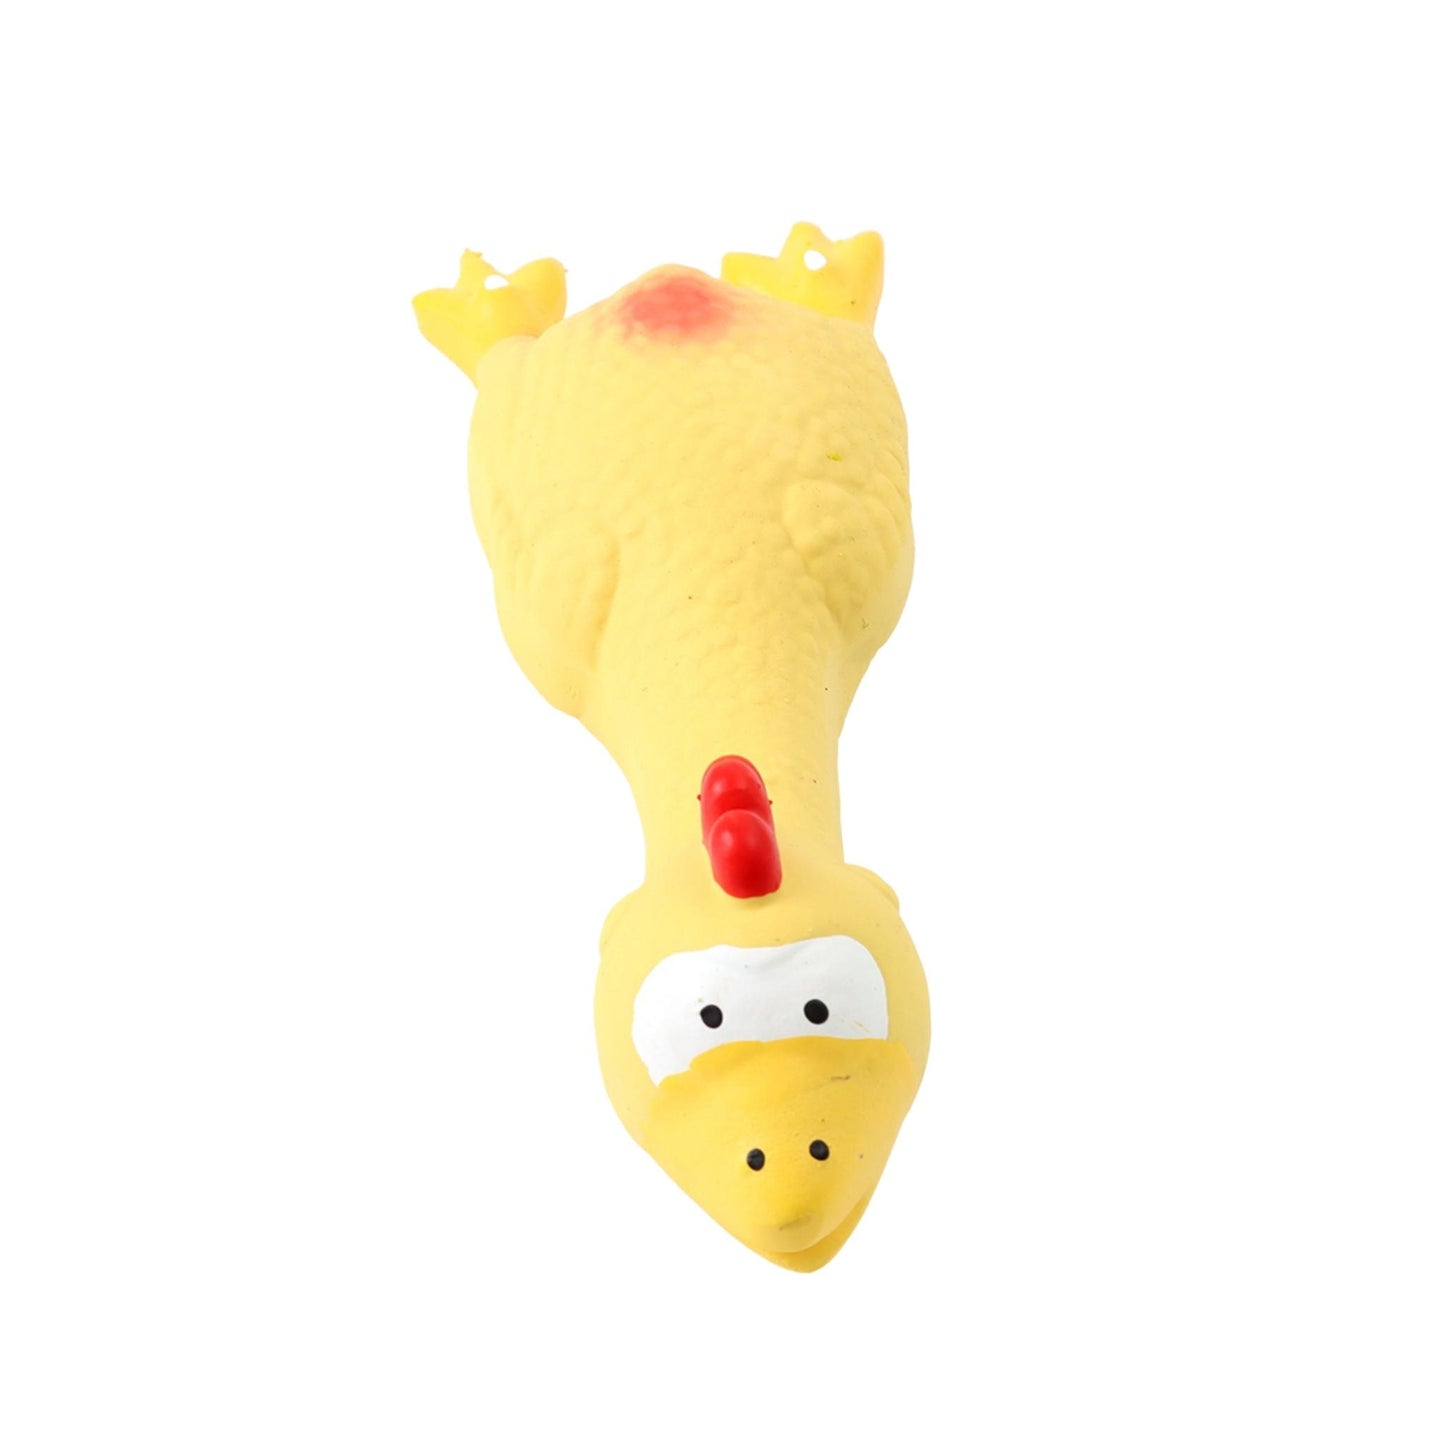 Foodie Puppies Latex Rubber Squeaky Dog Chew Toy - Yellow Hen